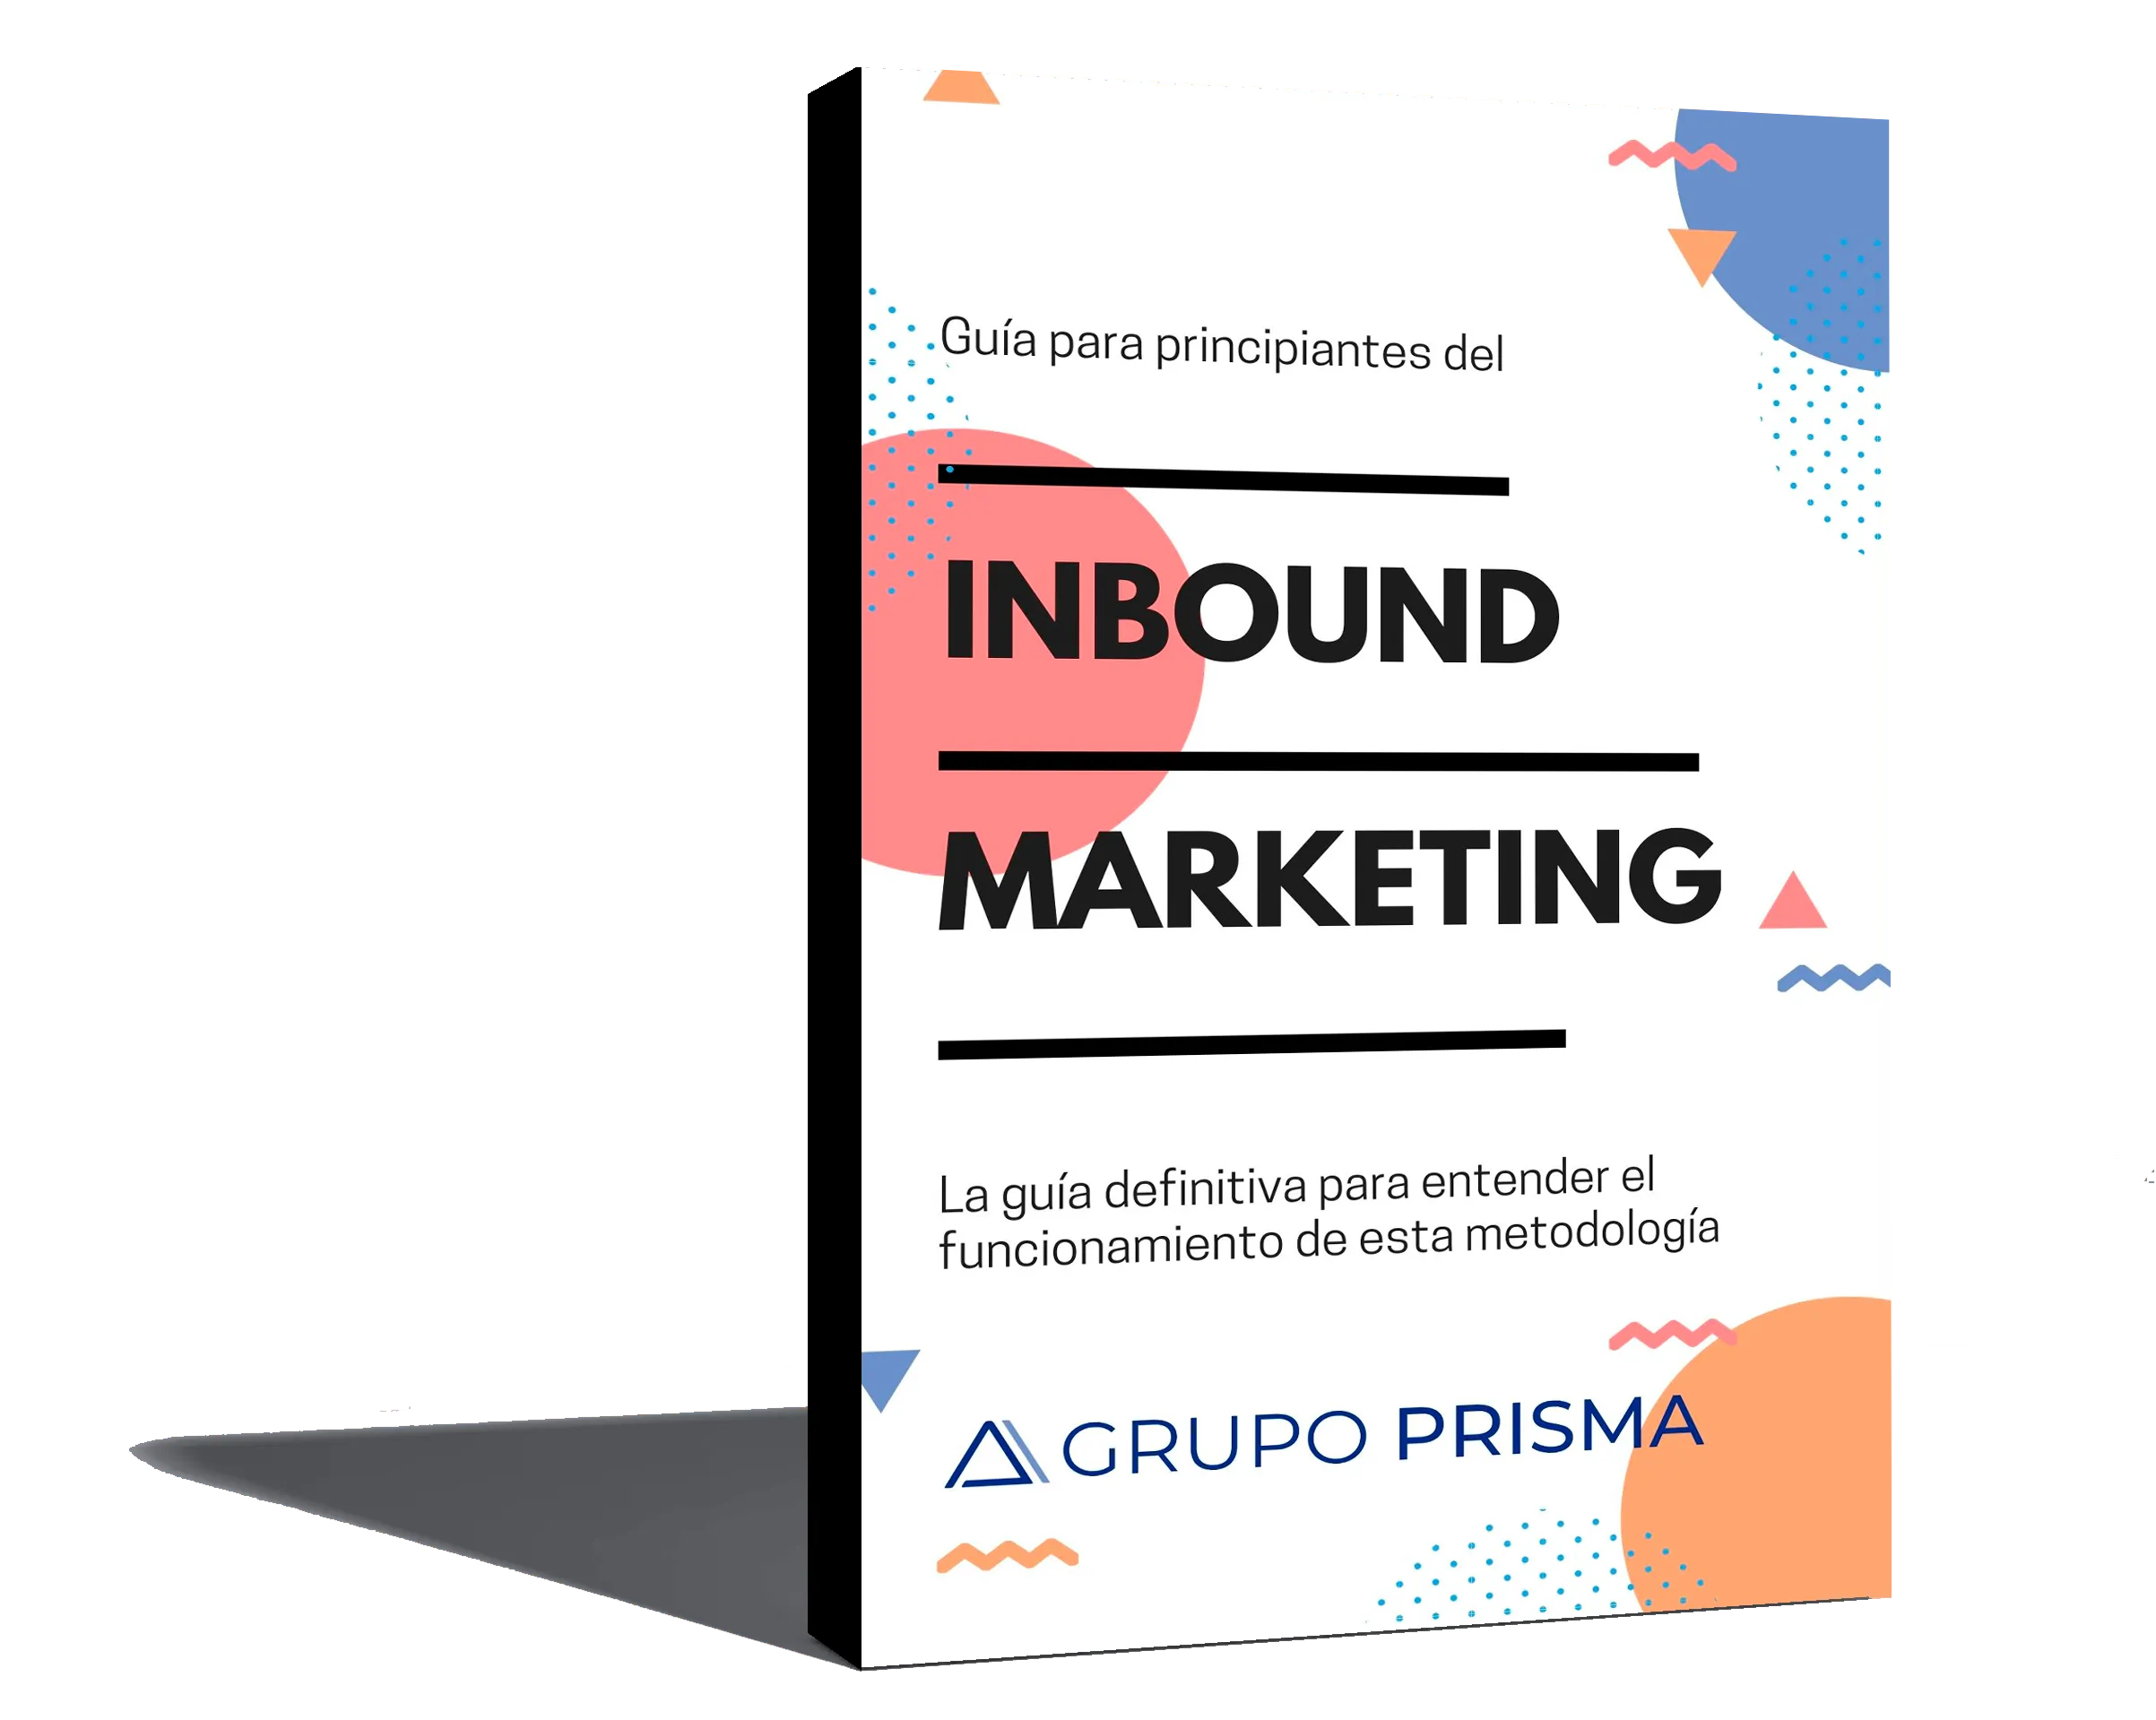 Complete guide to understand what Inbound Marketing is. Inbound Marketing Guide.